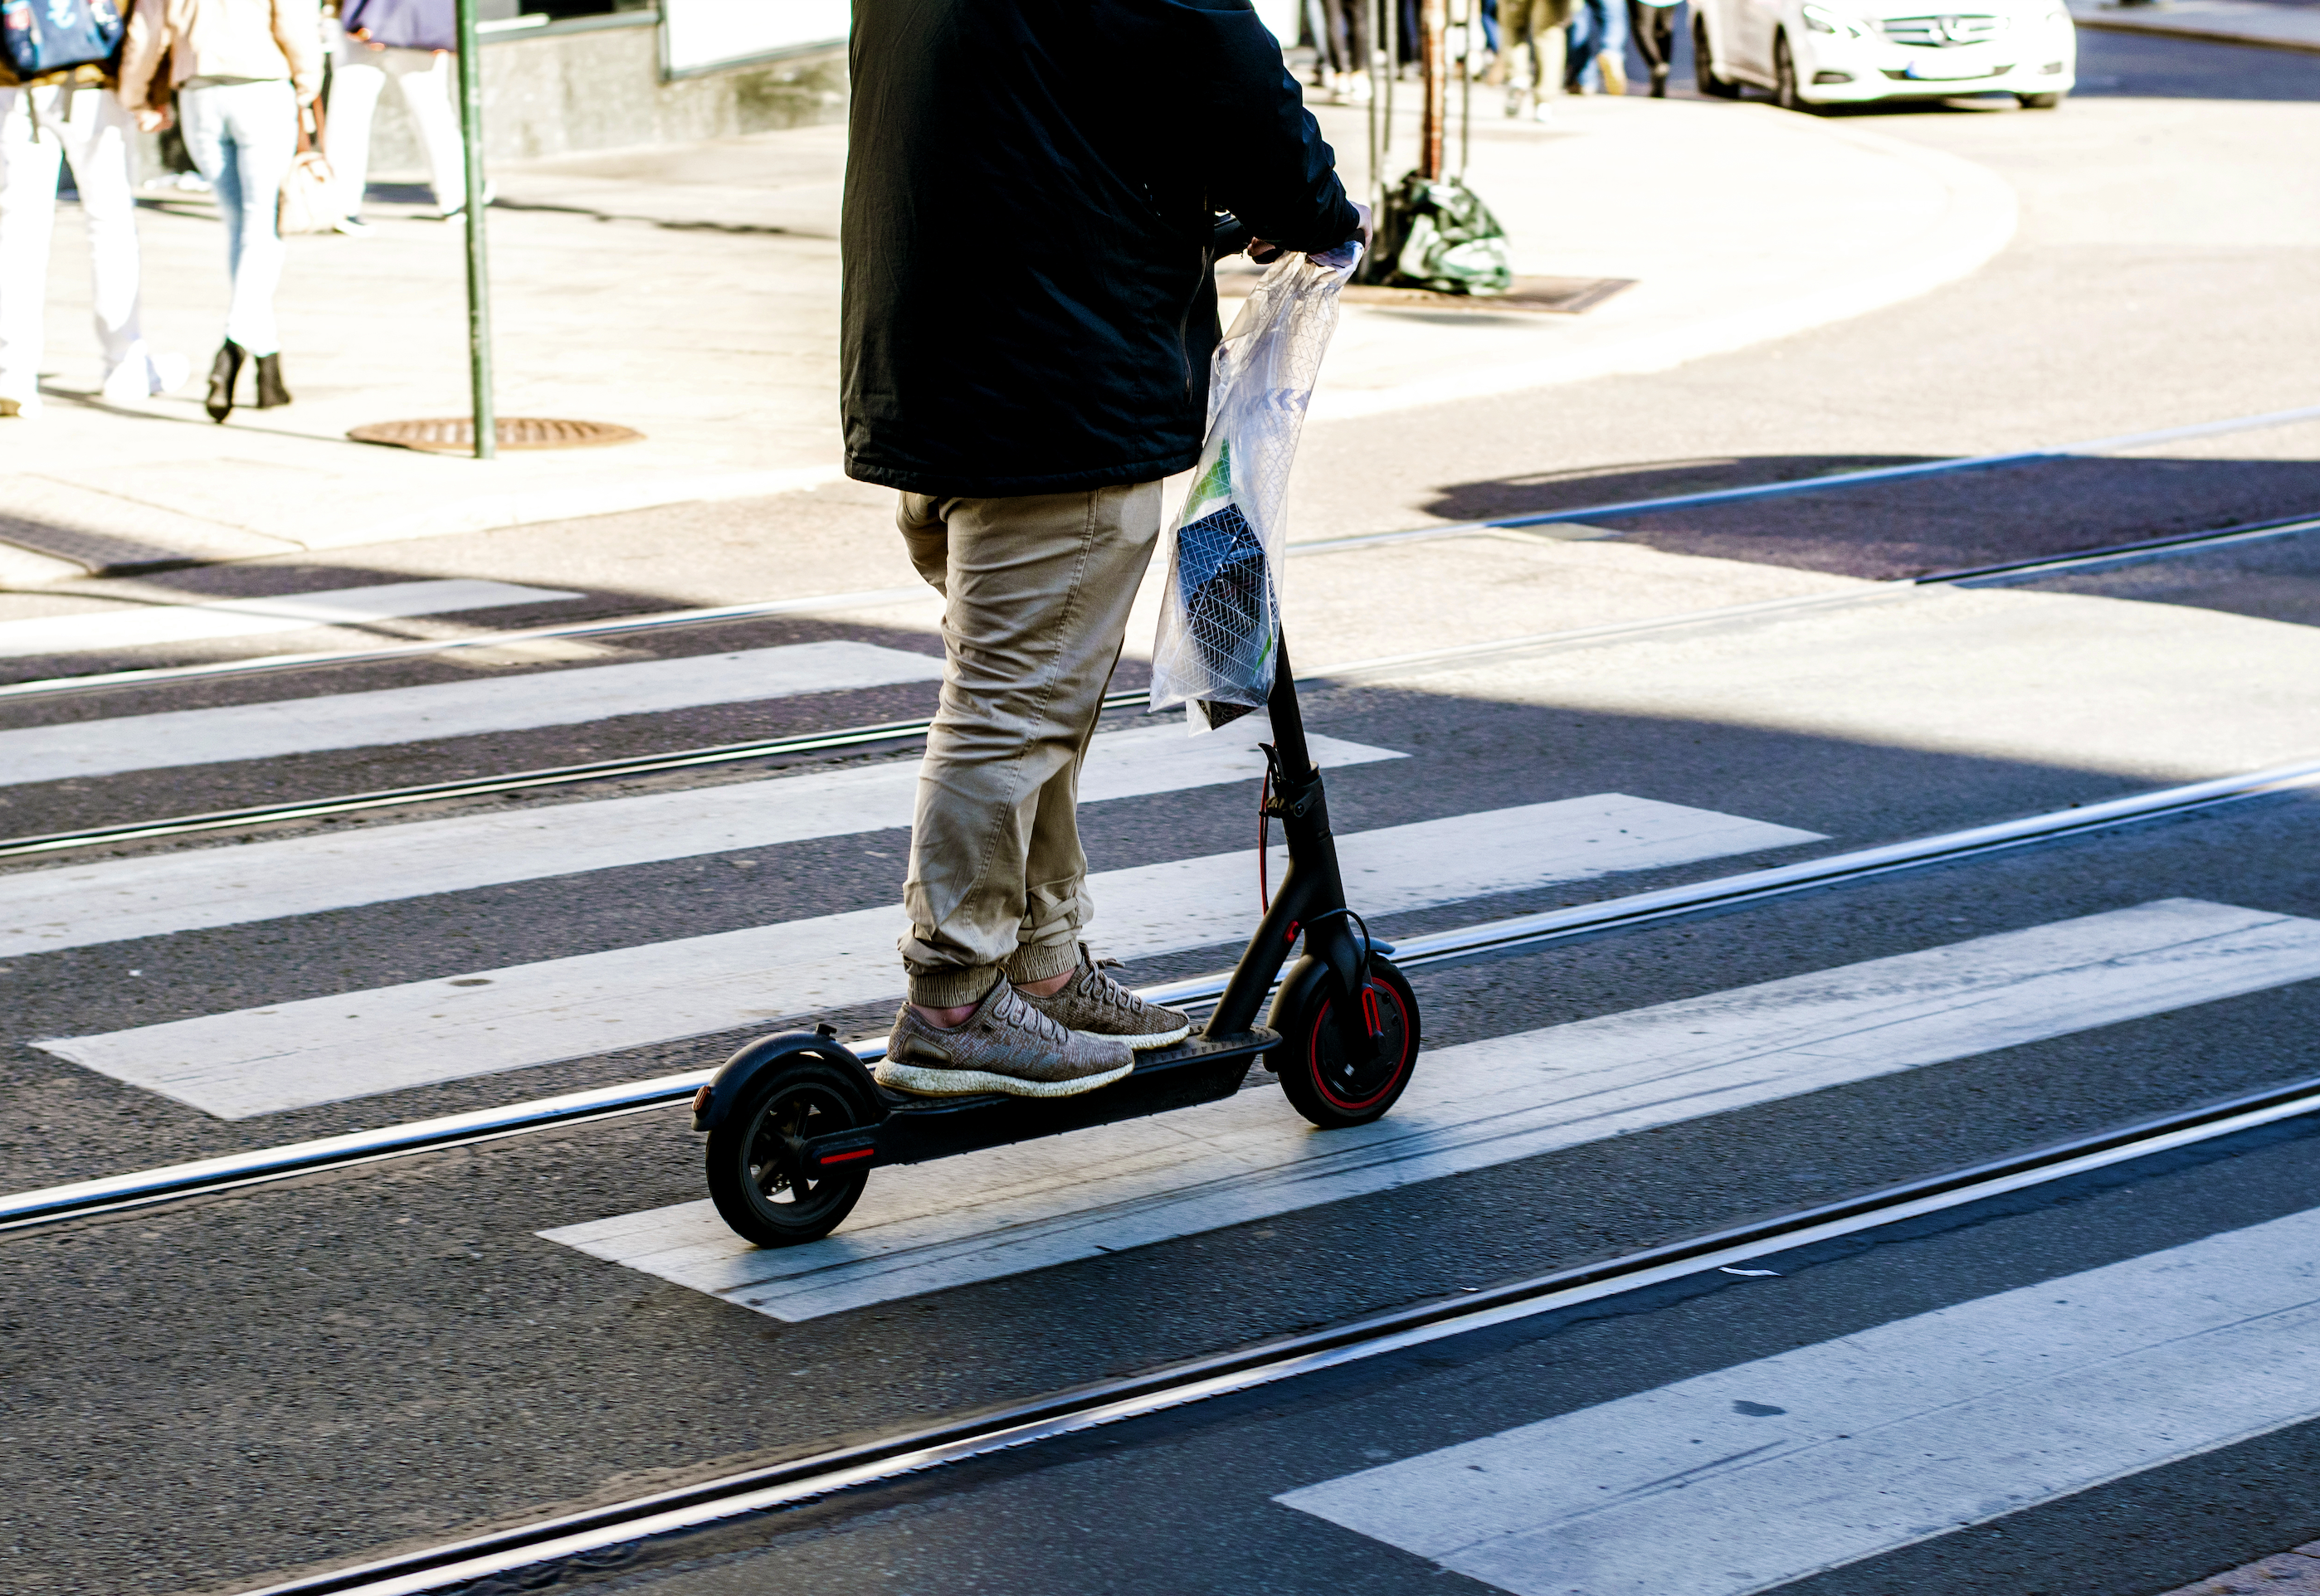 employee riding an electric scooter